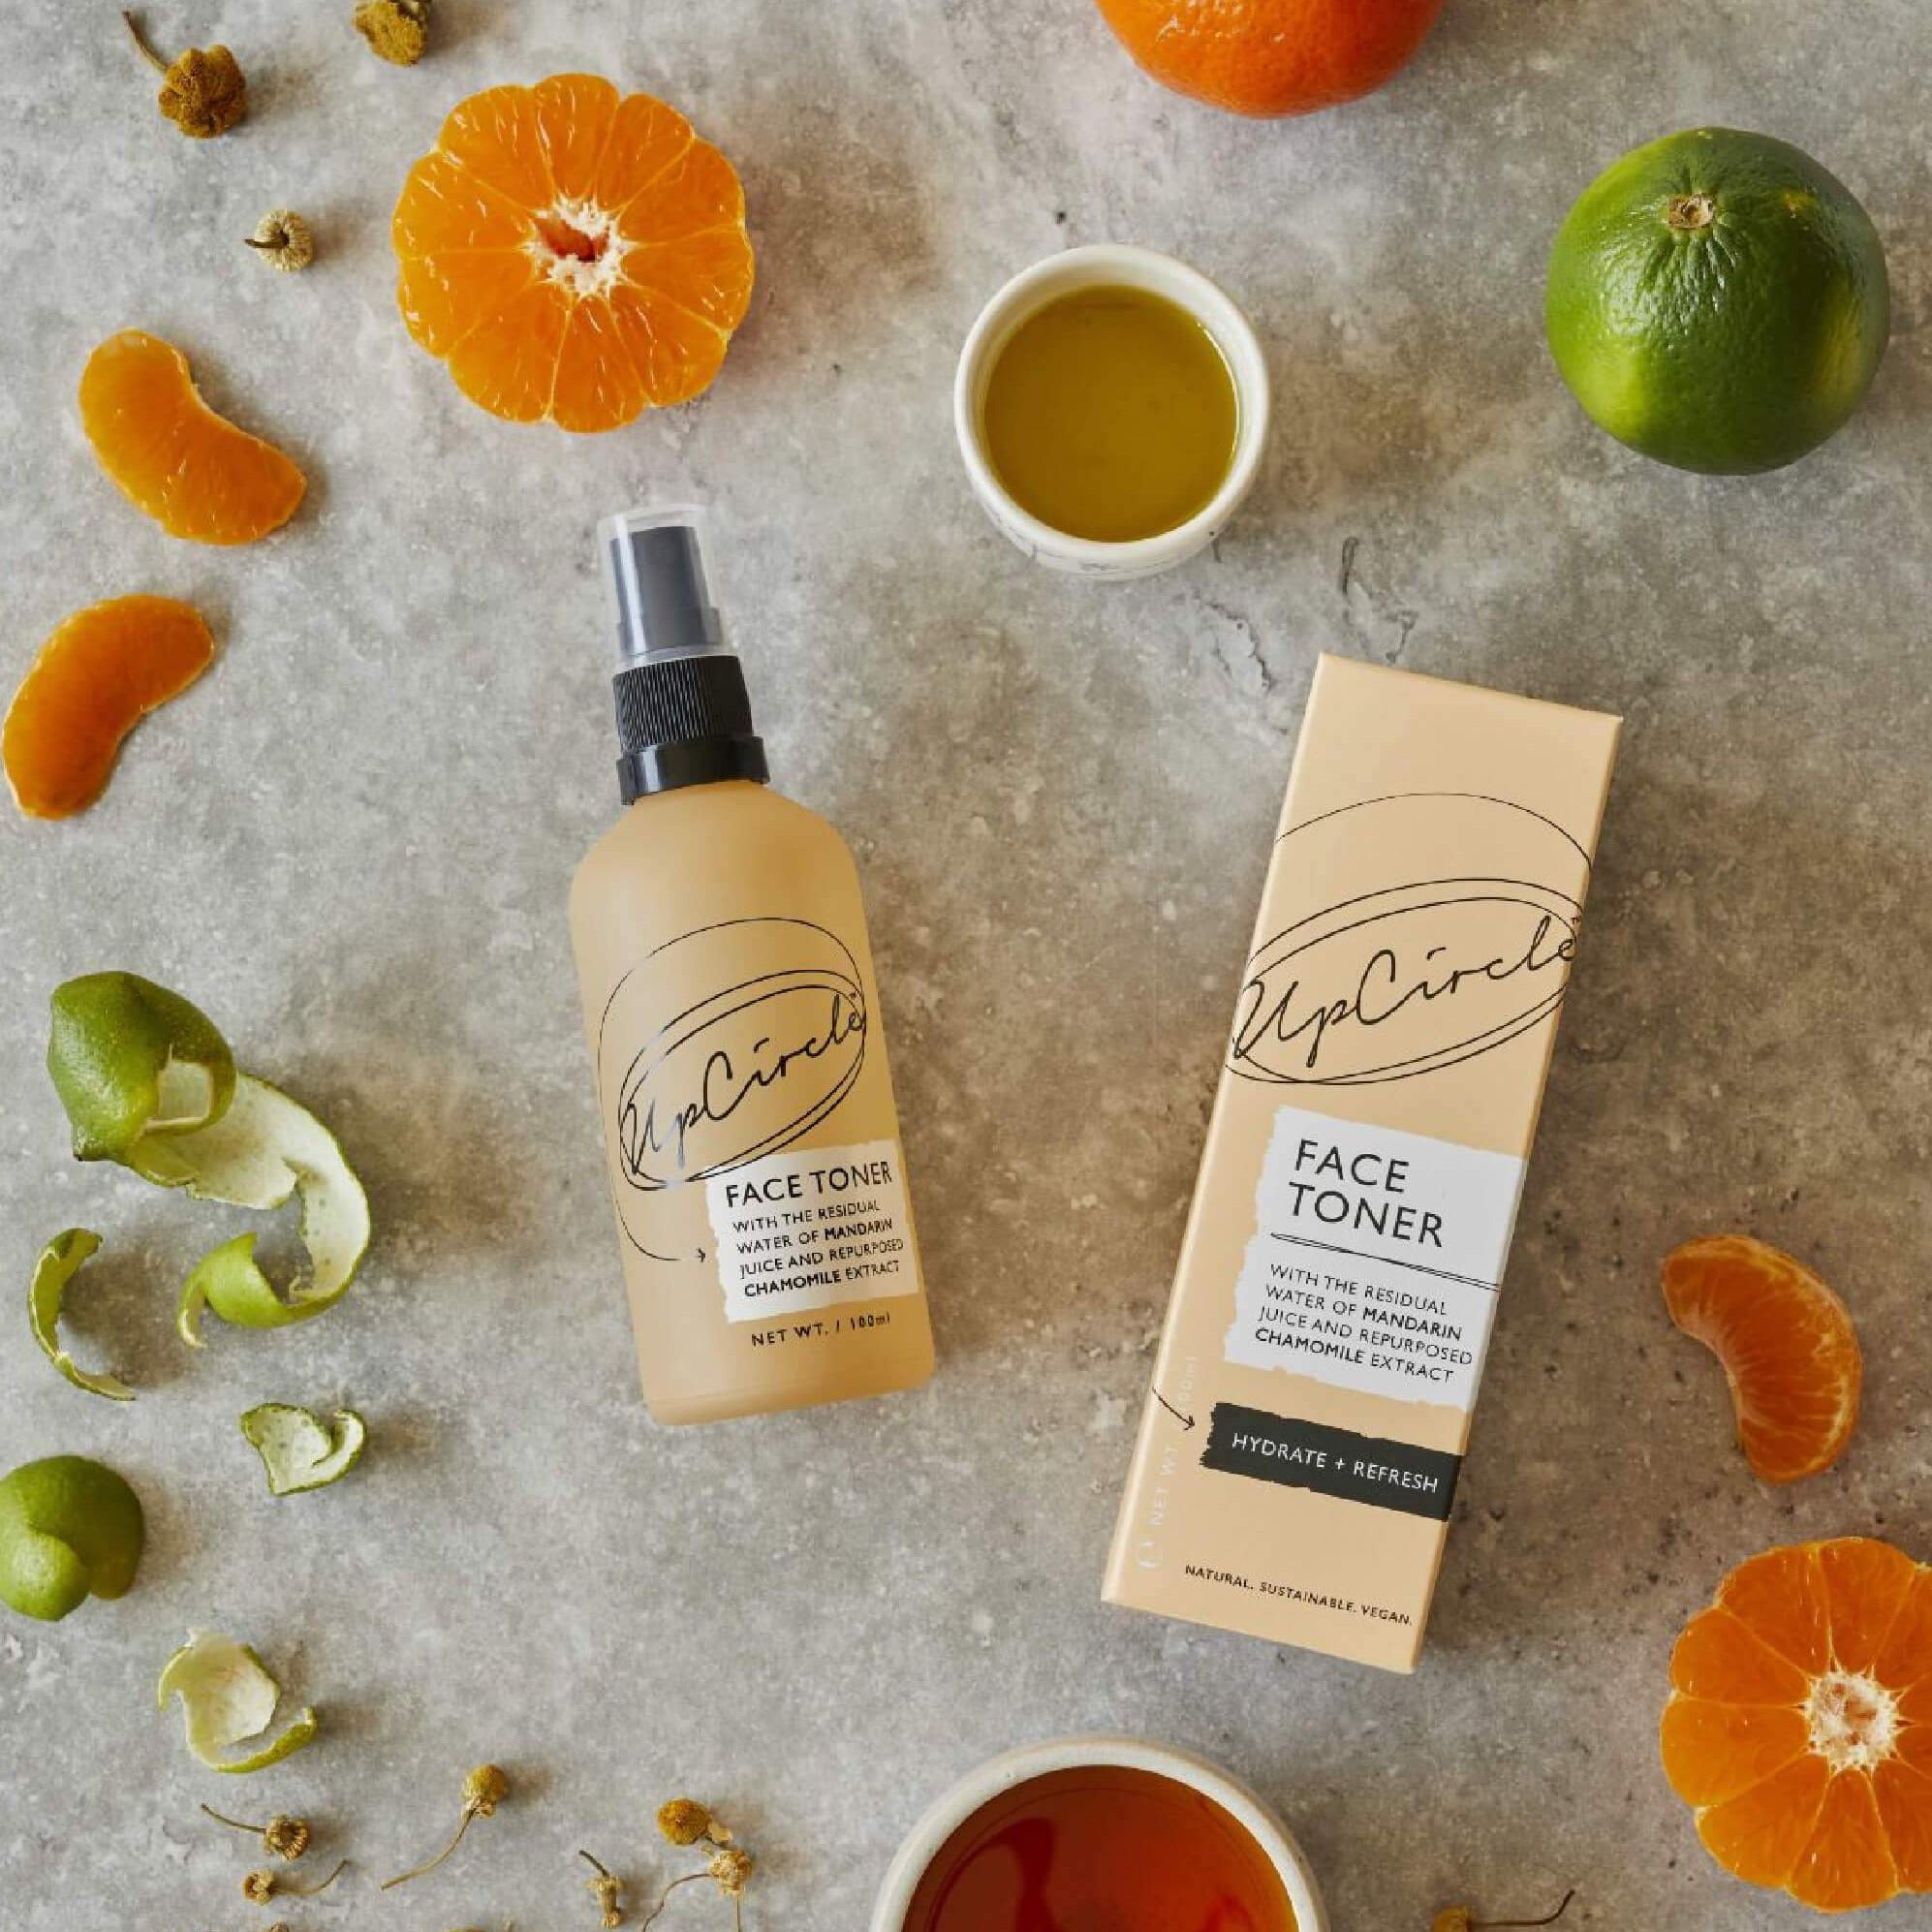 UpCircle face toner outside its package with orange and lime slices surrounding.